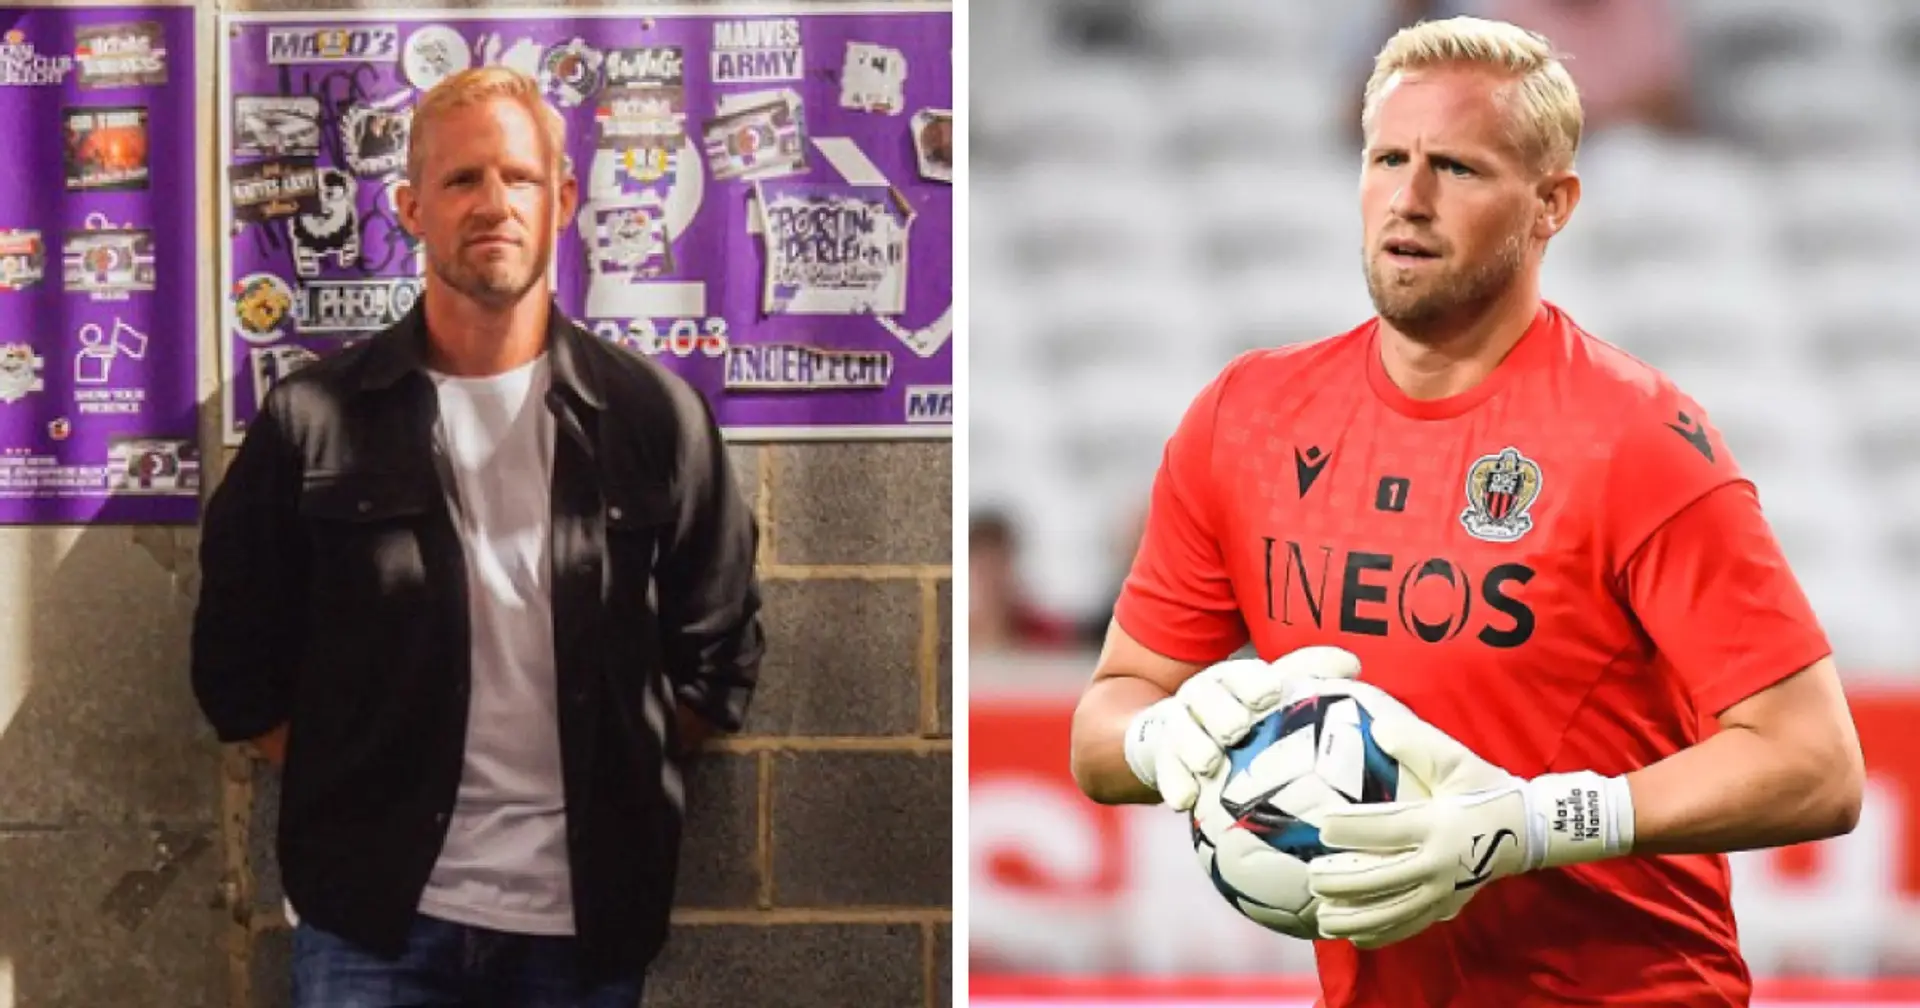 Kasper Schmeichel close to 1-year deal with RSC Anderlecht : r/soccer